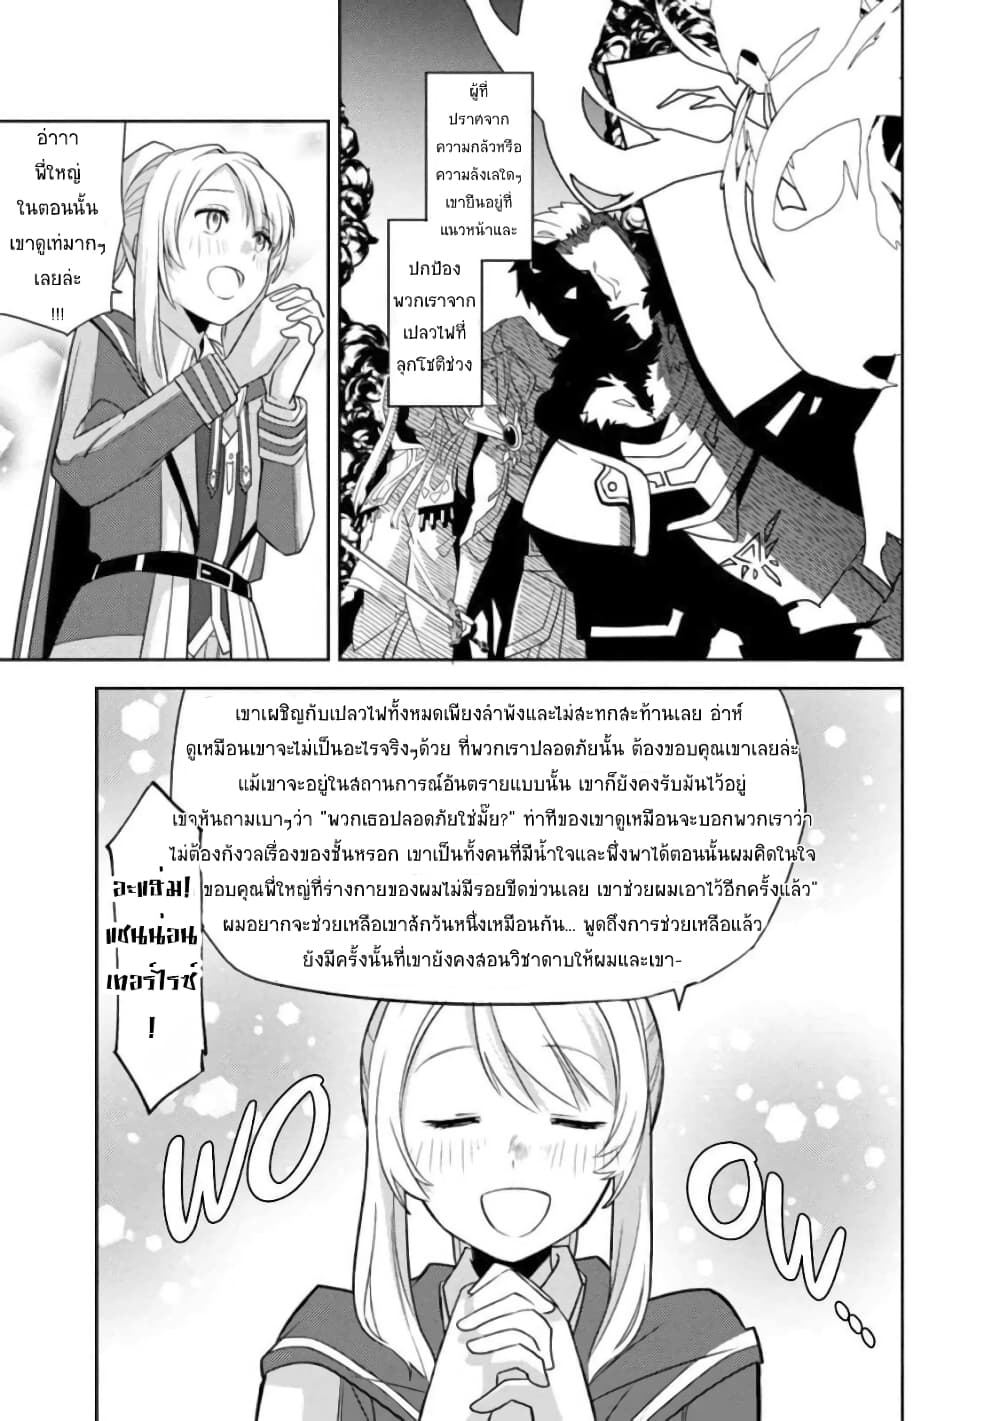 The Reincarnated Swordsman With 9999 Strength Wants to Become a Magician! ตอนที่ 2.1 (19)